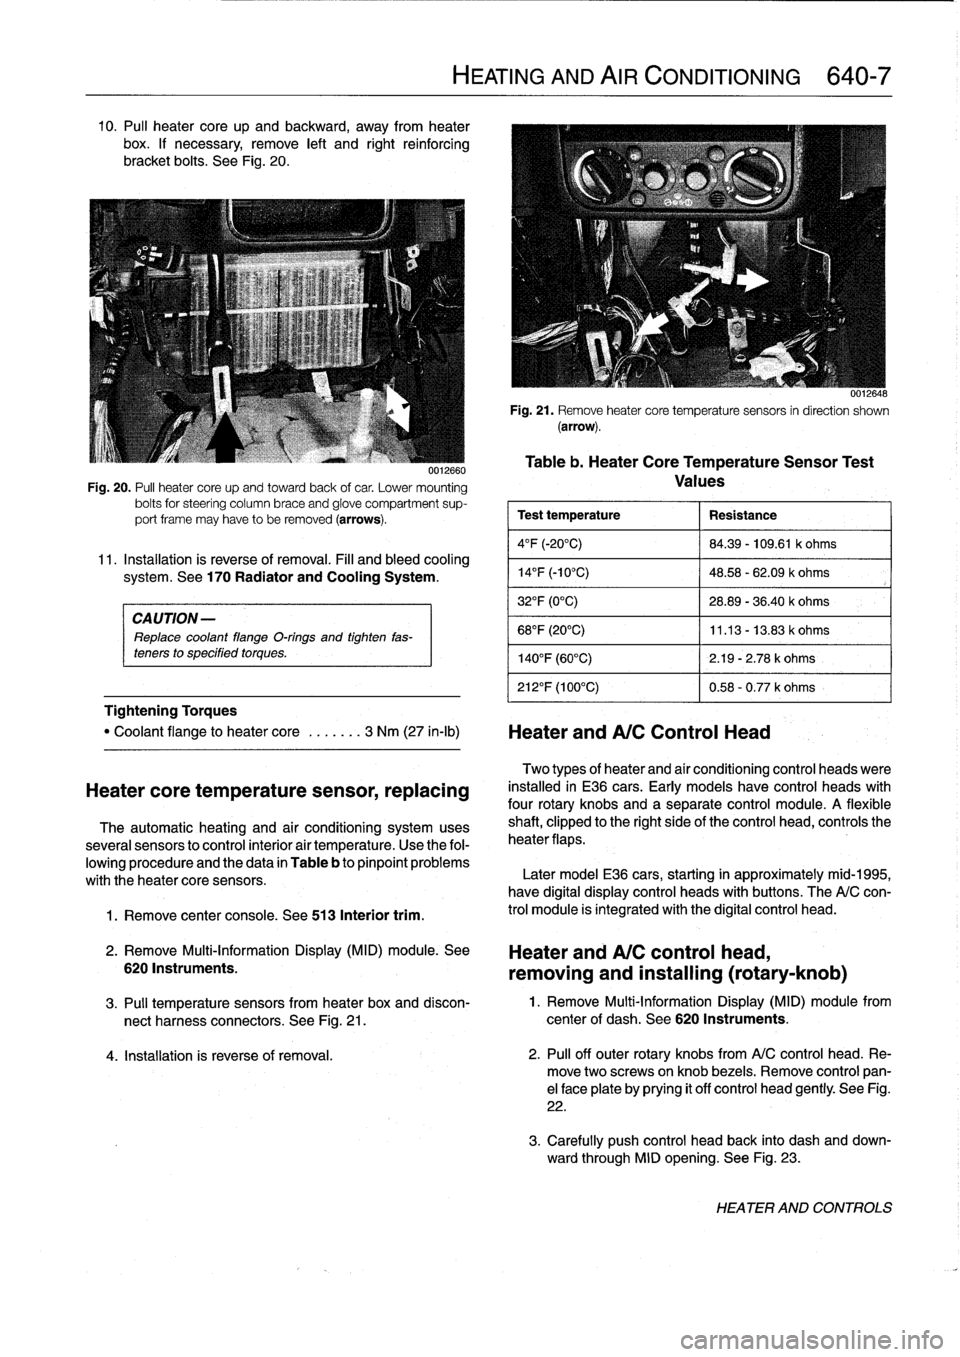 BMW 325i 1994 E36 Workshop Manual 10
.
Pul¡
heater
core
up
and
backward,
away
from
heater
box
.
If
necessary,
remove
left
and
right
reinforcing
bracket
bolts
.
See
Fig
.
20
.

CAUTION-

Replace
coolant
flange
O-rings
and
tighten
fas-